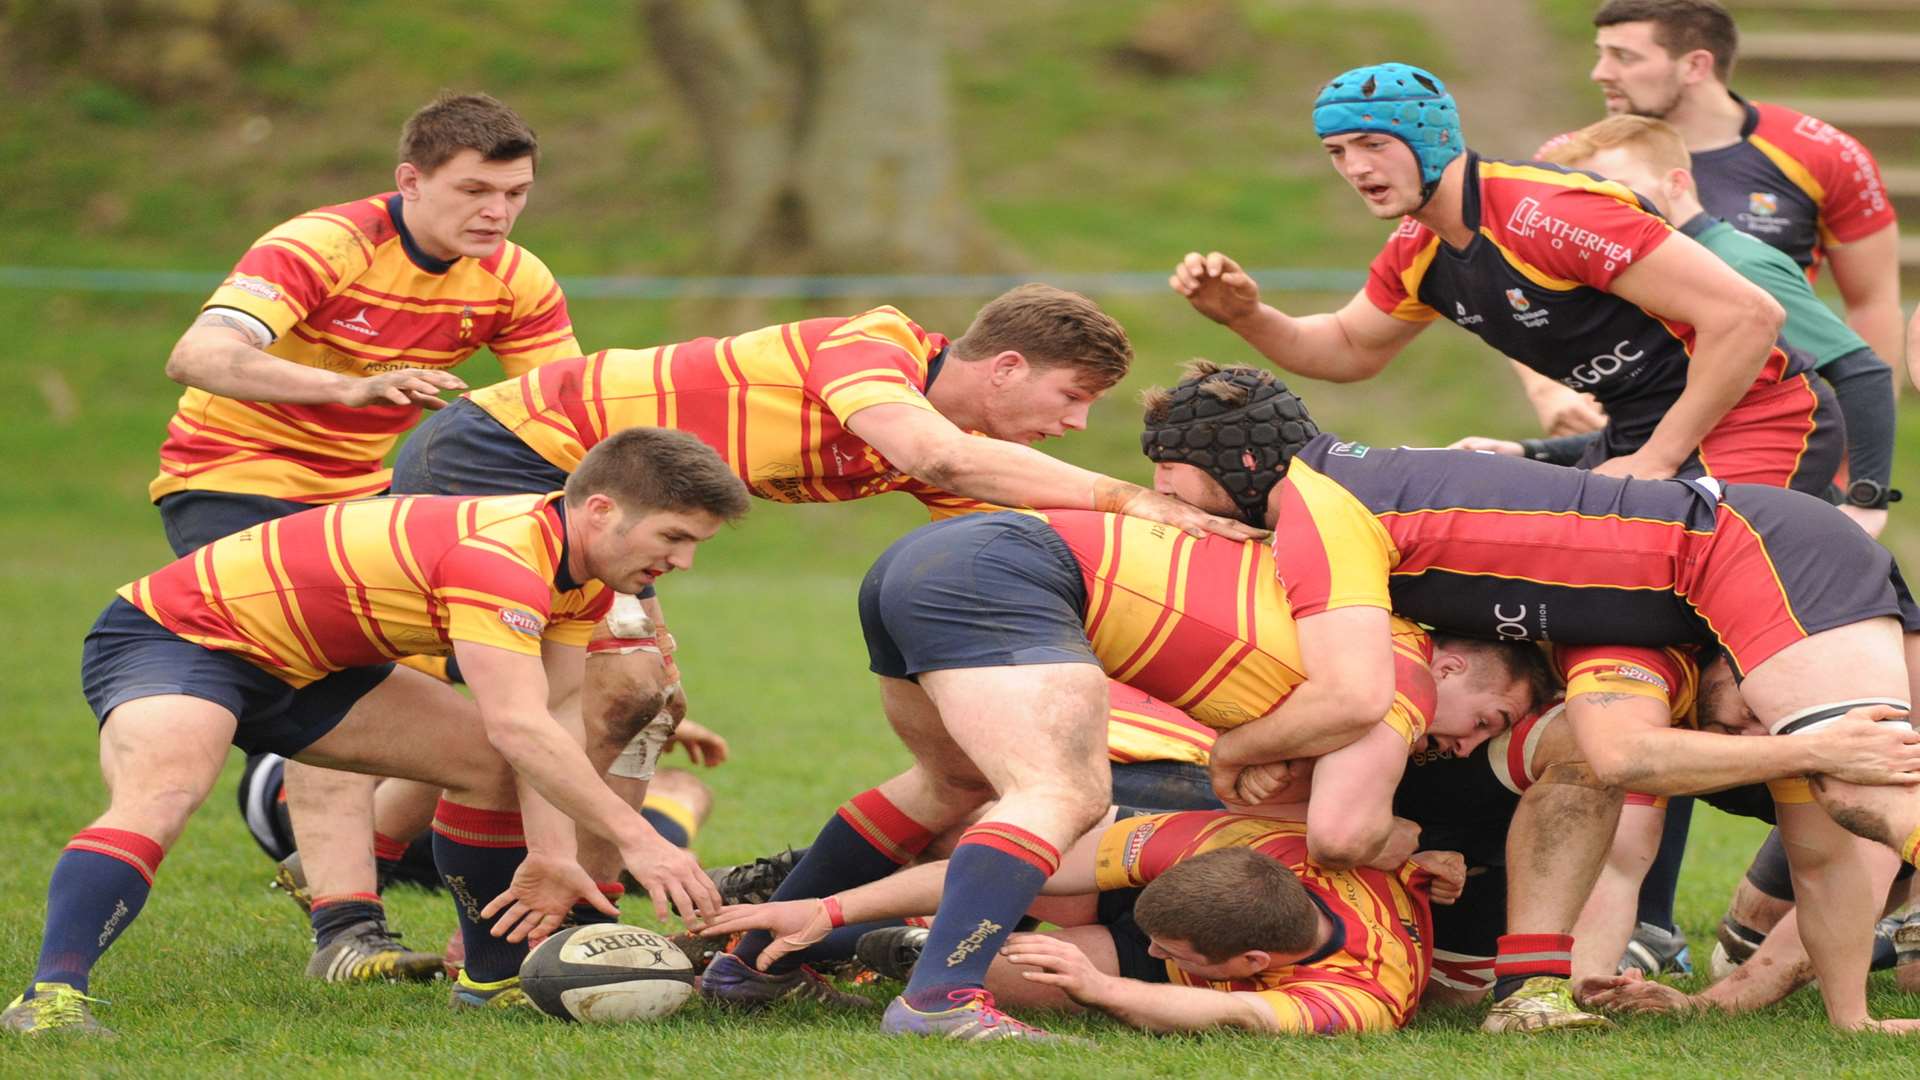 Medway Rugby Club in action against Chobham earlier this month Picture: Steve Crispe FM4206911